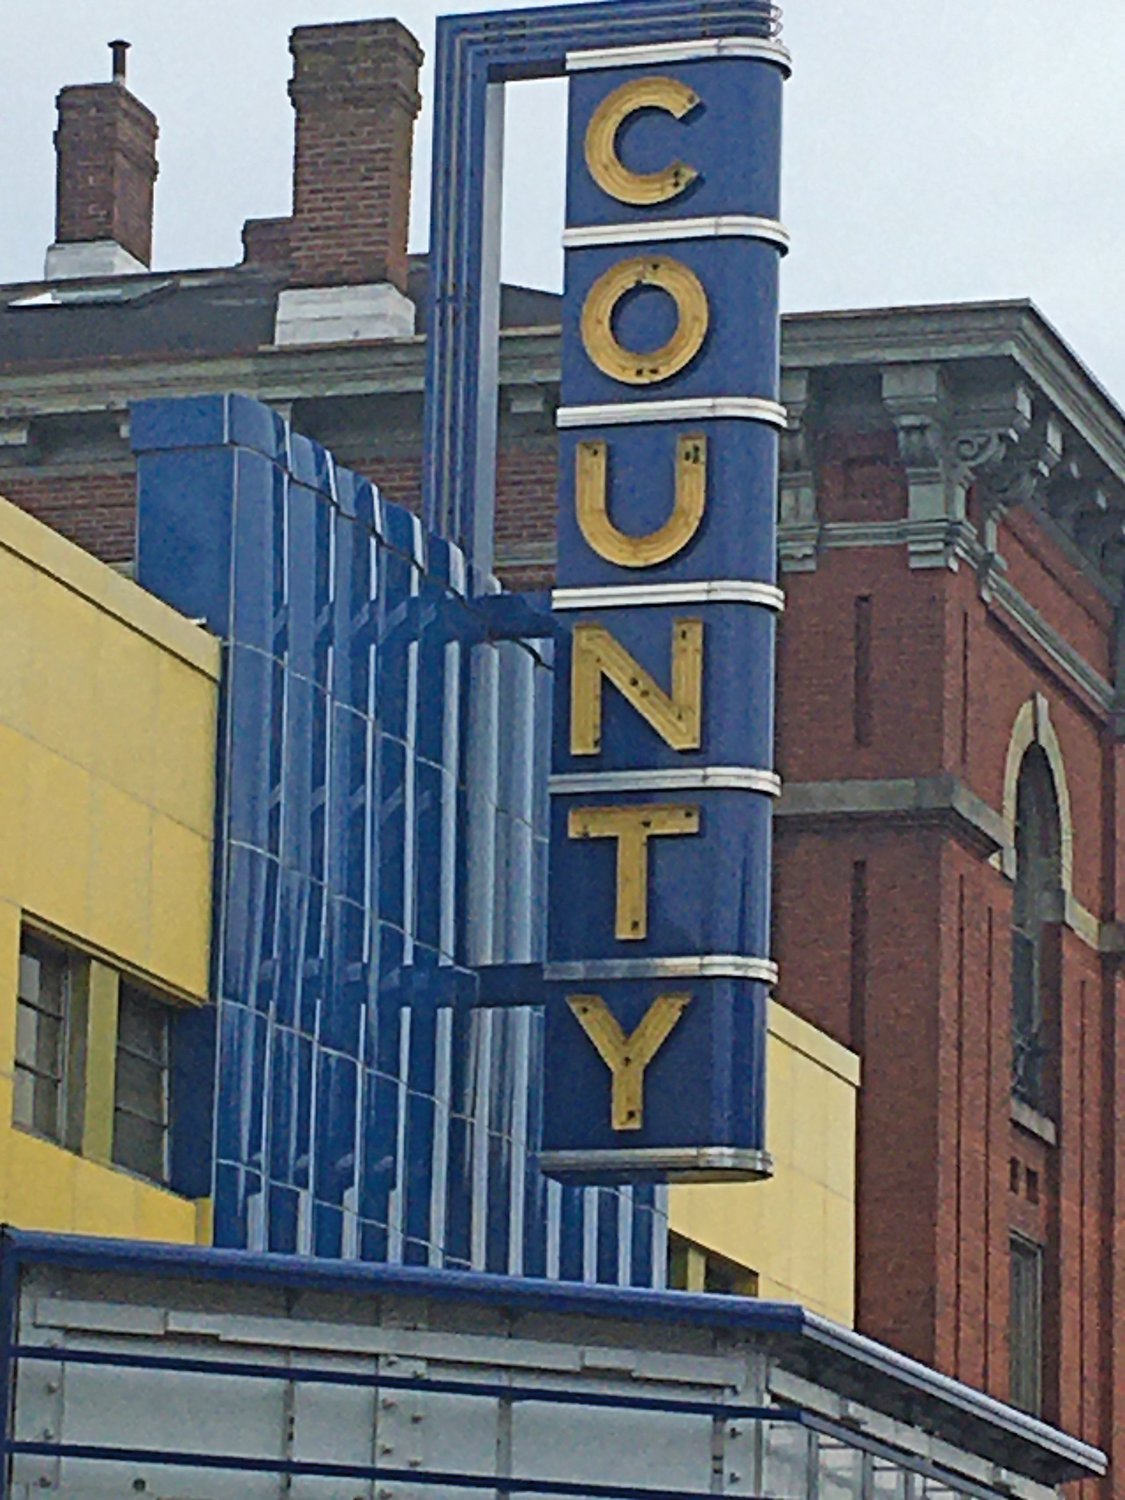 The nonprofit County Theater in Doylestown, which has been closed for a year during construction, raised its restored sign aloft in later February as renovations and expansion close in on the finish.